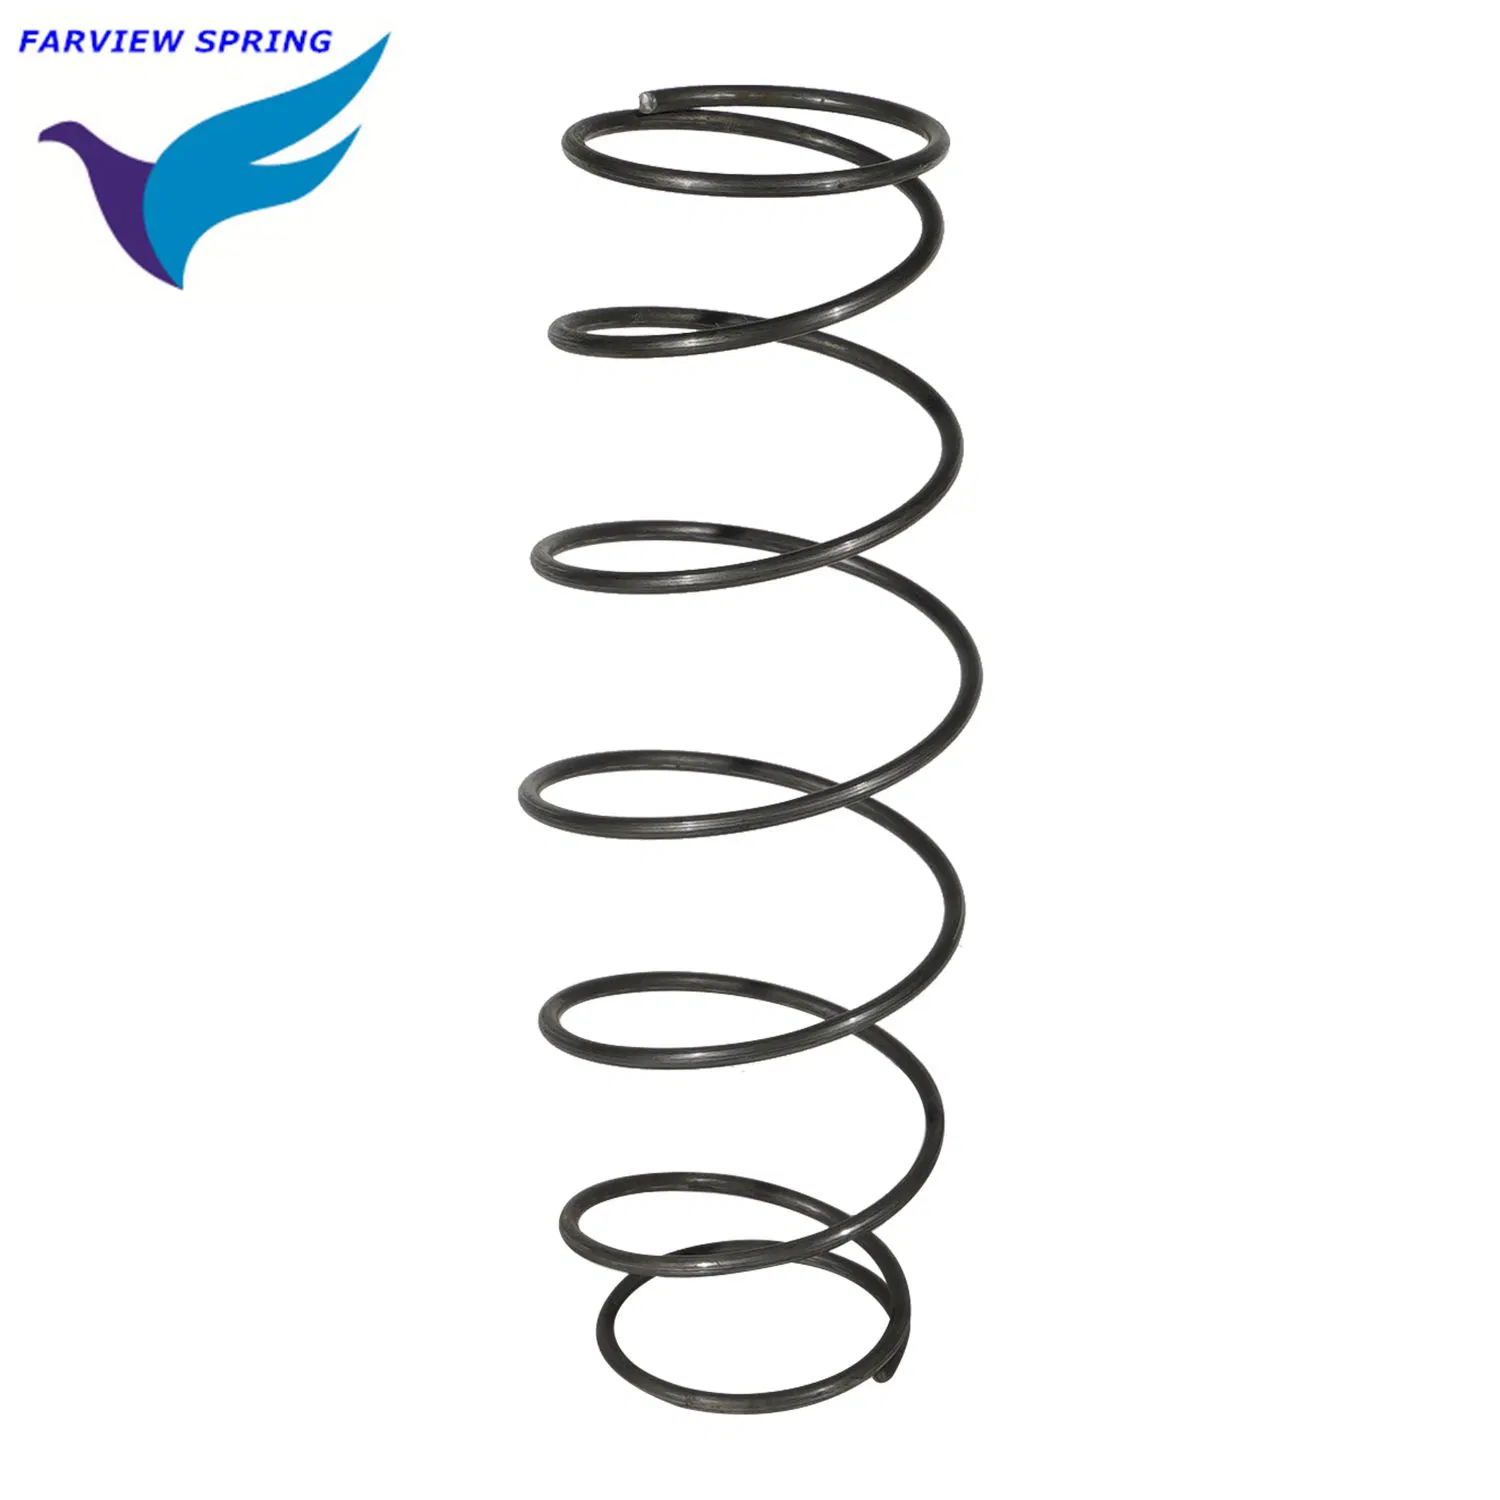 Spare Parts of Combine Harvester Spring Lubrication System Spring Tiny Springs Precision Springs Stainless Steel Springs Compression Springs Pressure Springs